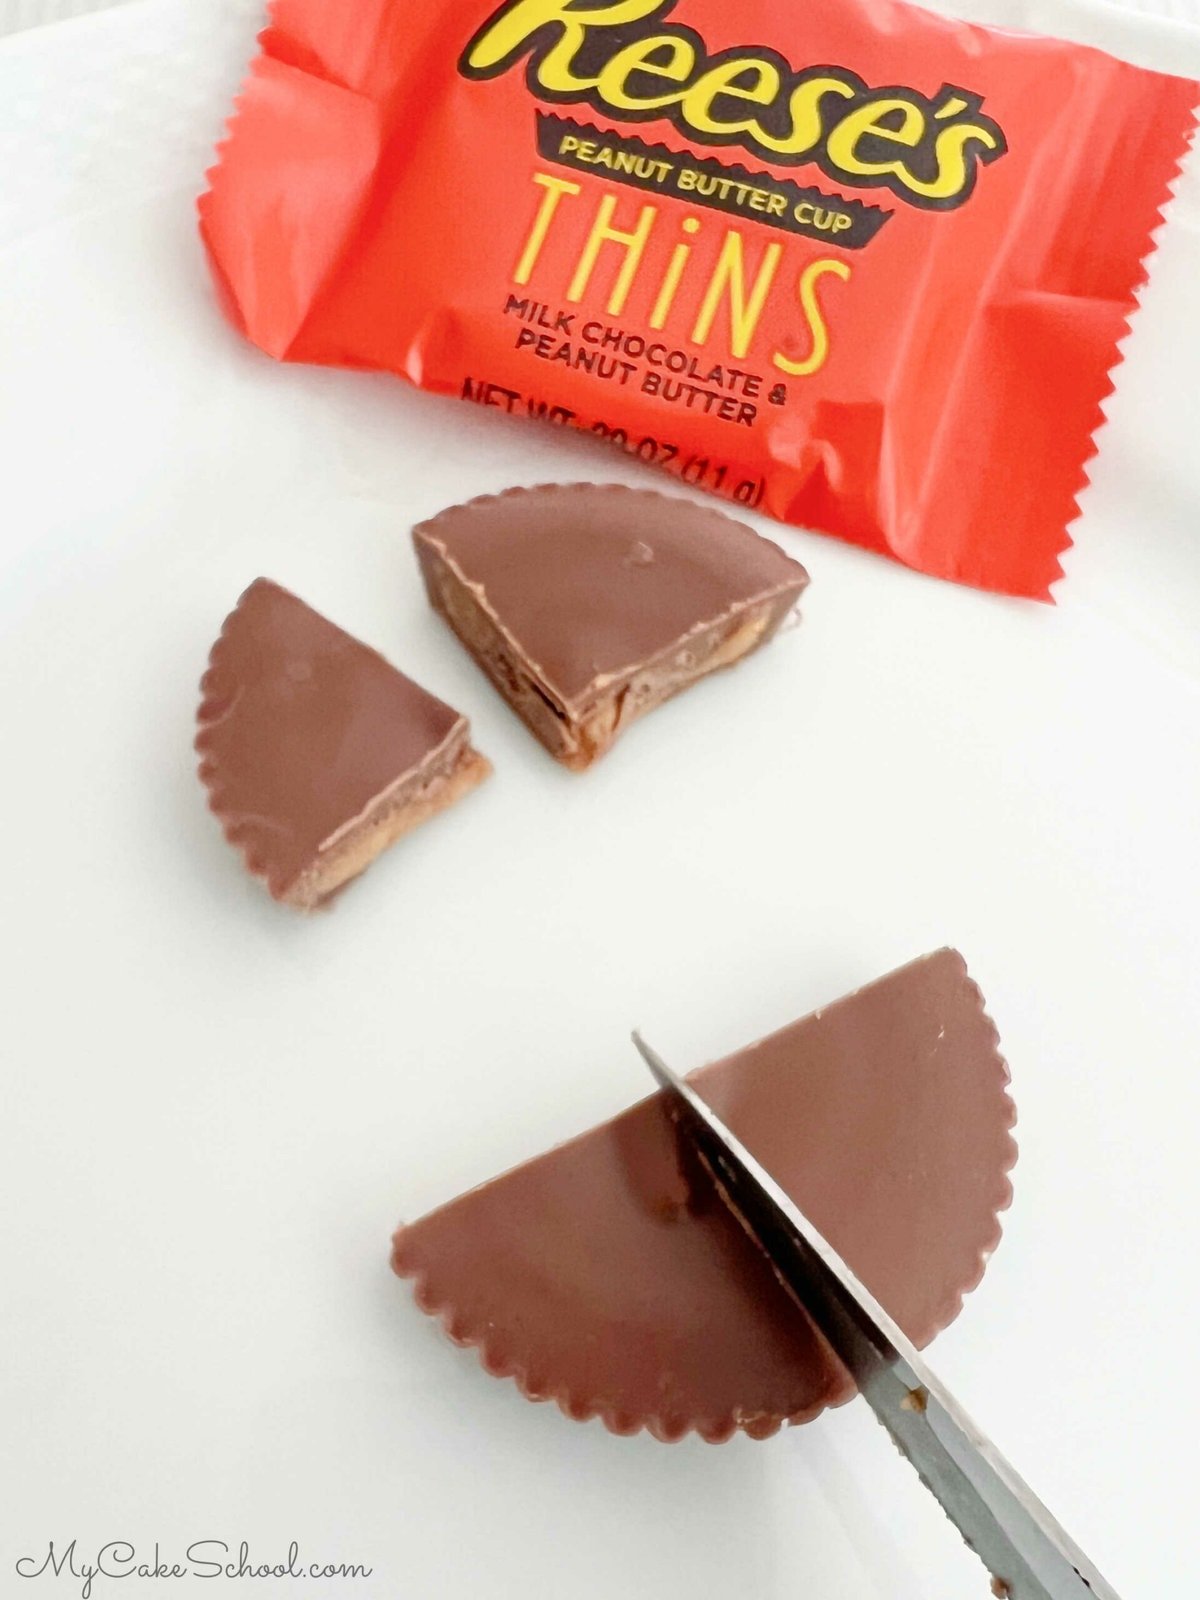 Reese's Peanut Butter Cup Thins, sliced in quarters to use a cupcake toppers